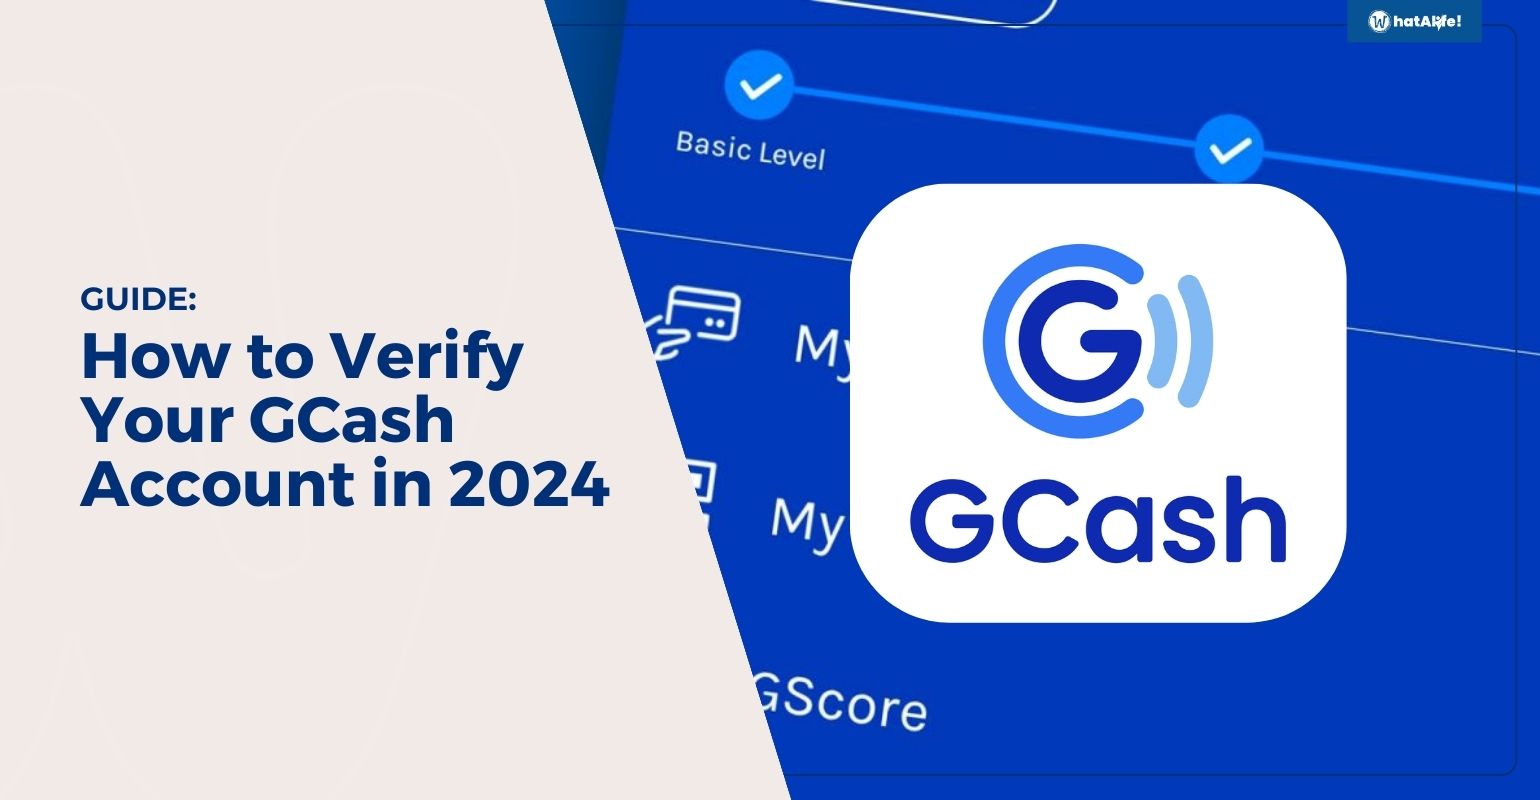 GUIDE: How to Verify Your GCash Account in 2024